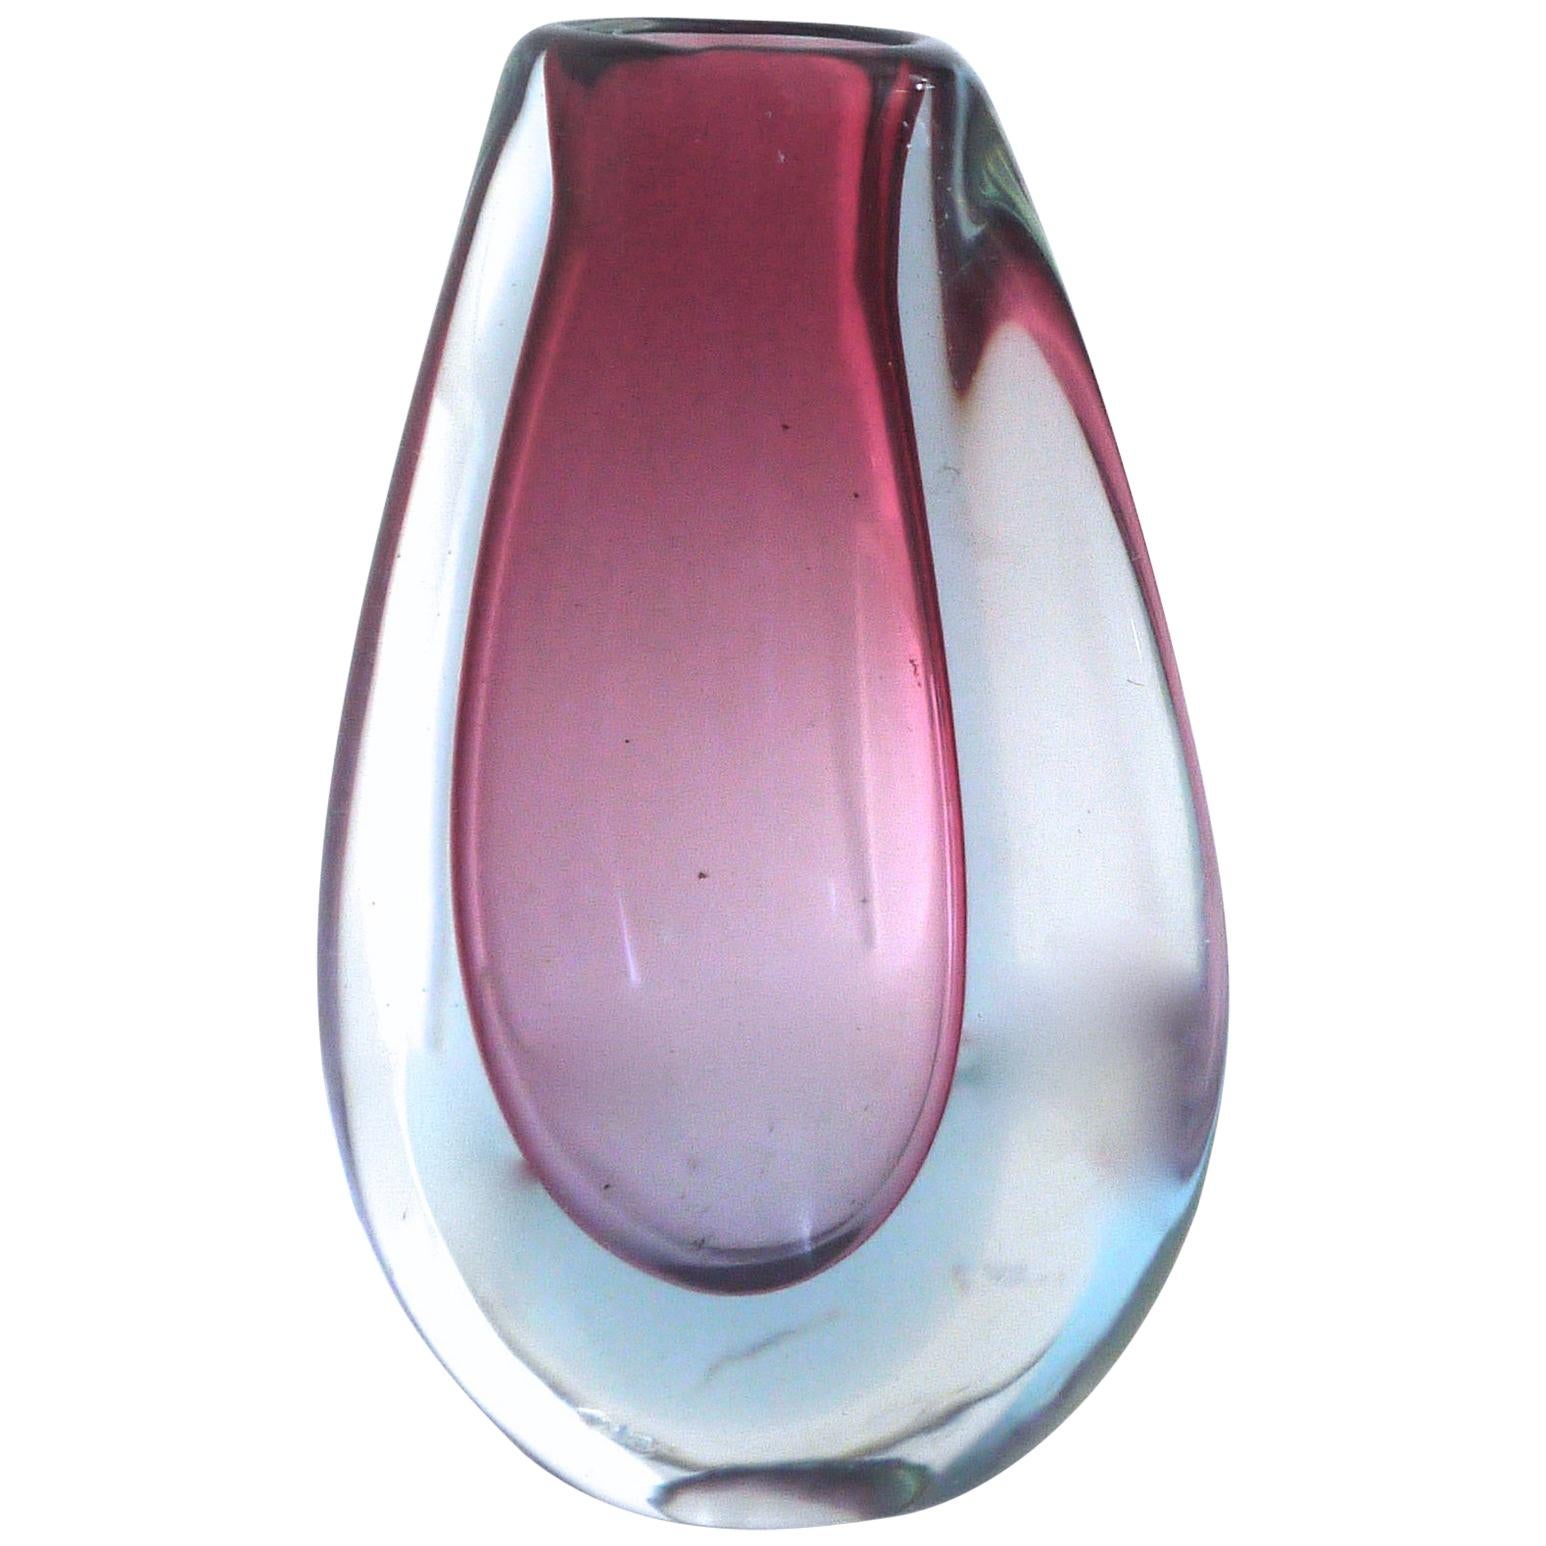 Murano Sommerso Teardrop Vintage Art Glass Vase Late 1960s-1970s Blues and Pinks For Sale